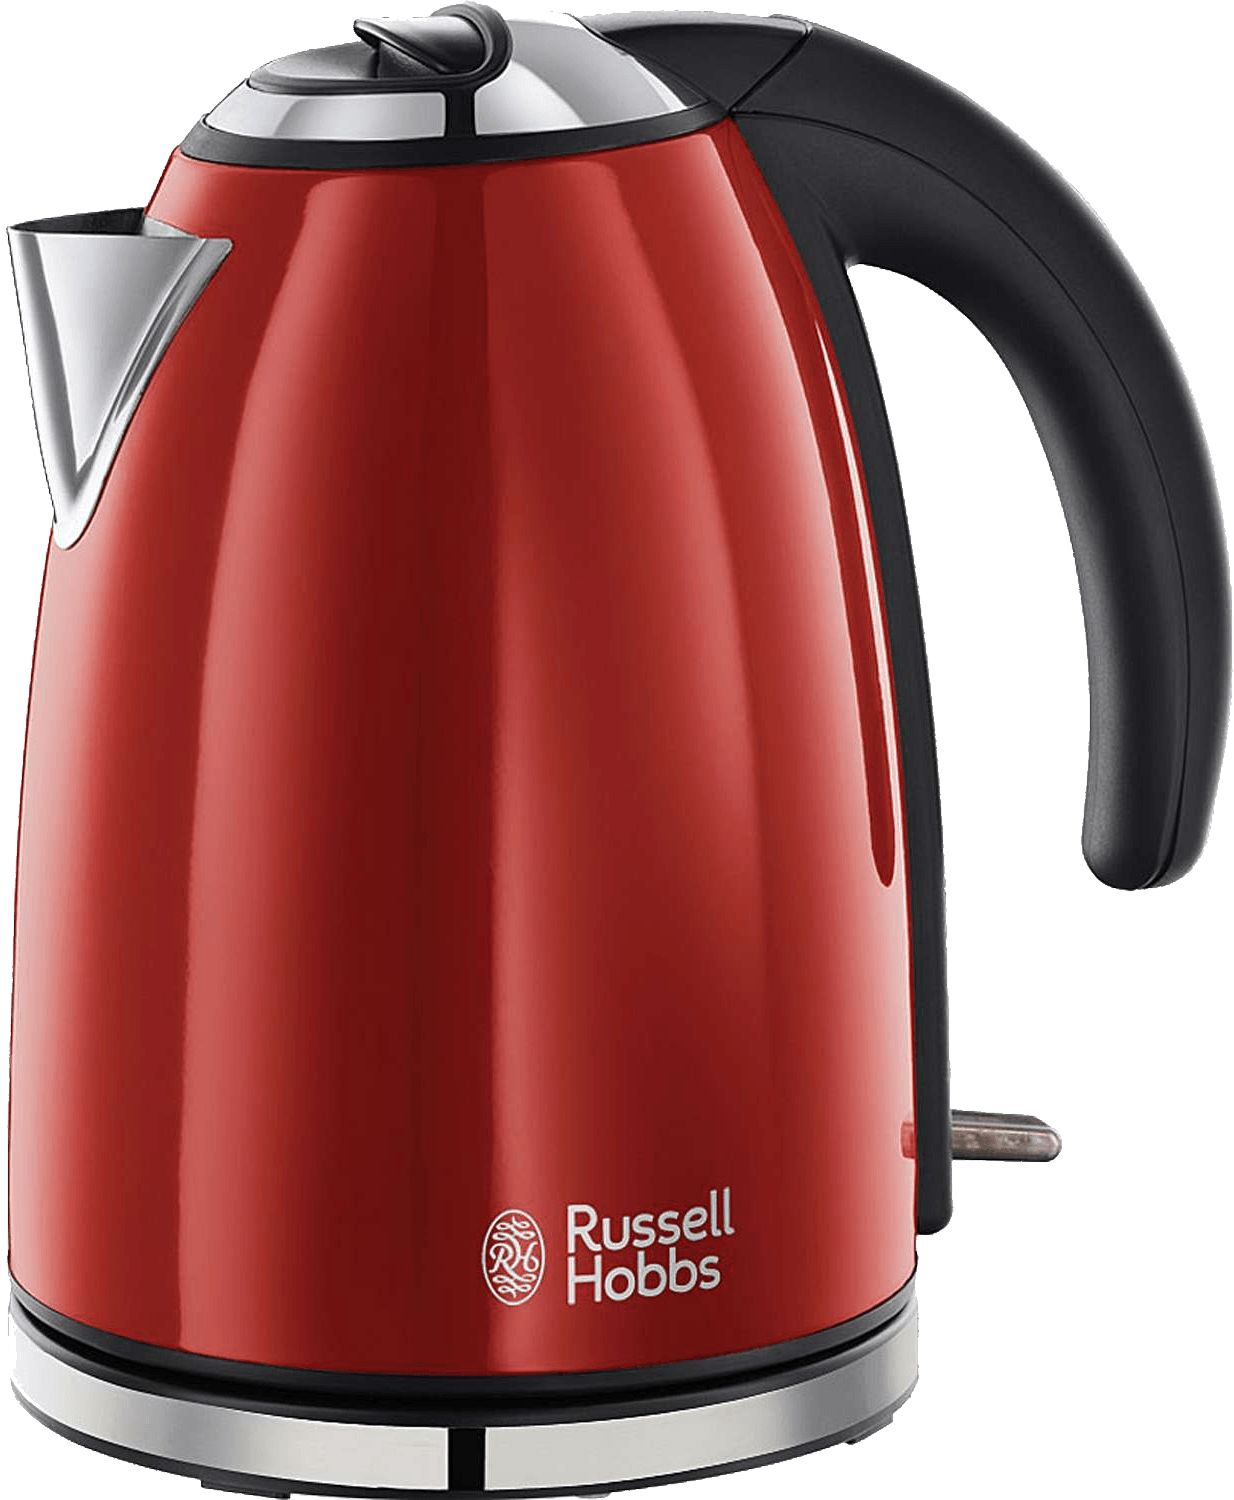 Kettle PNG Clipart Background